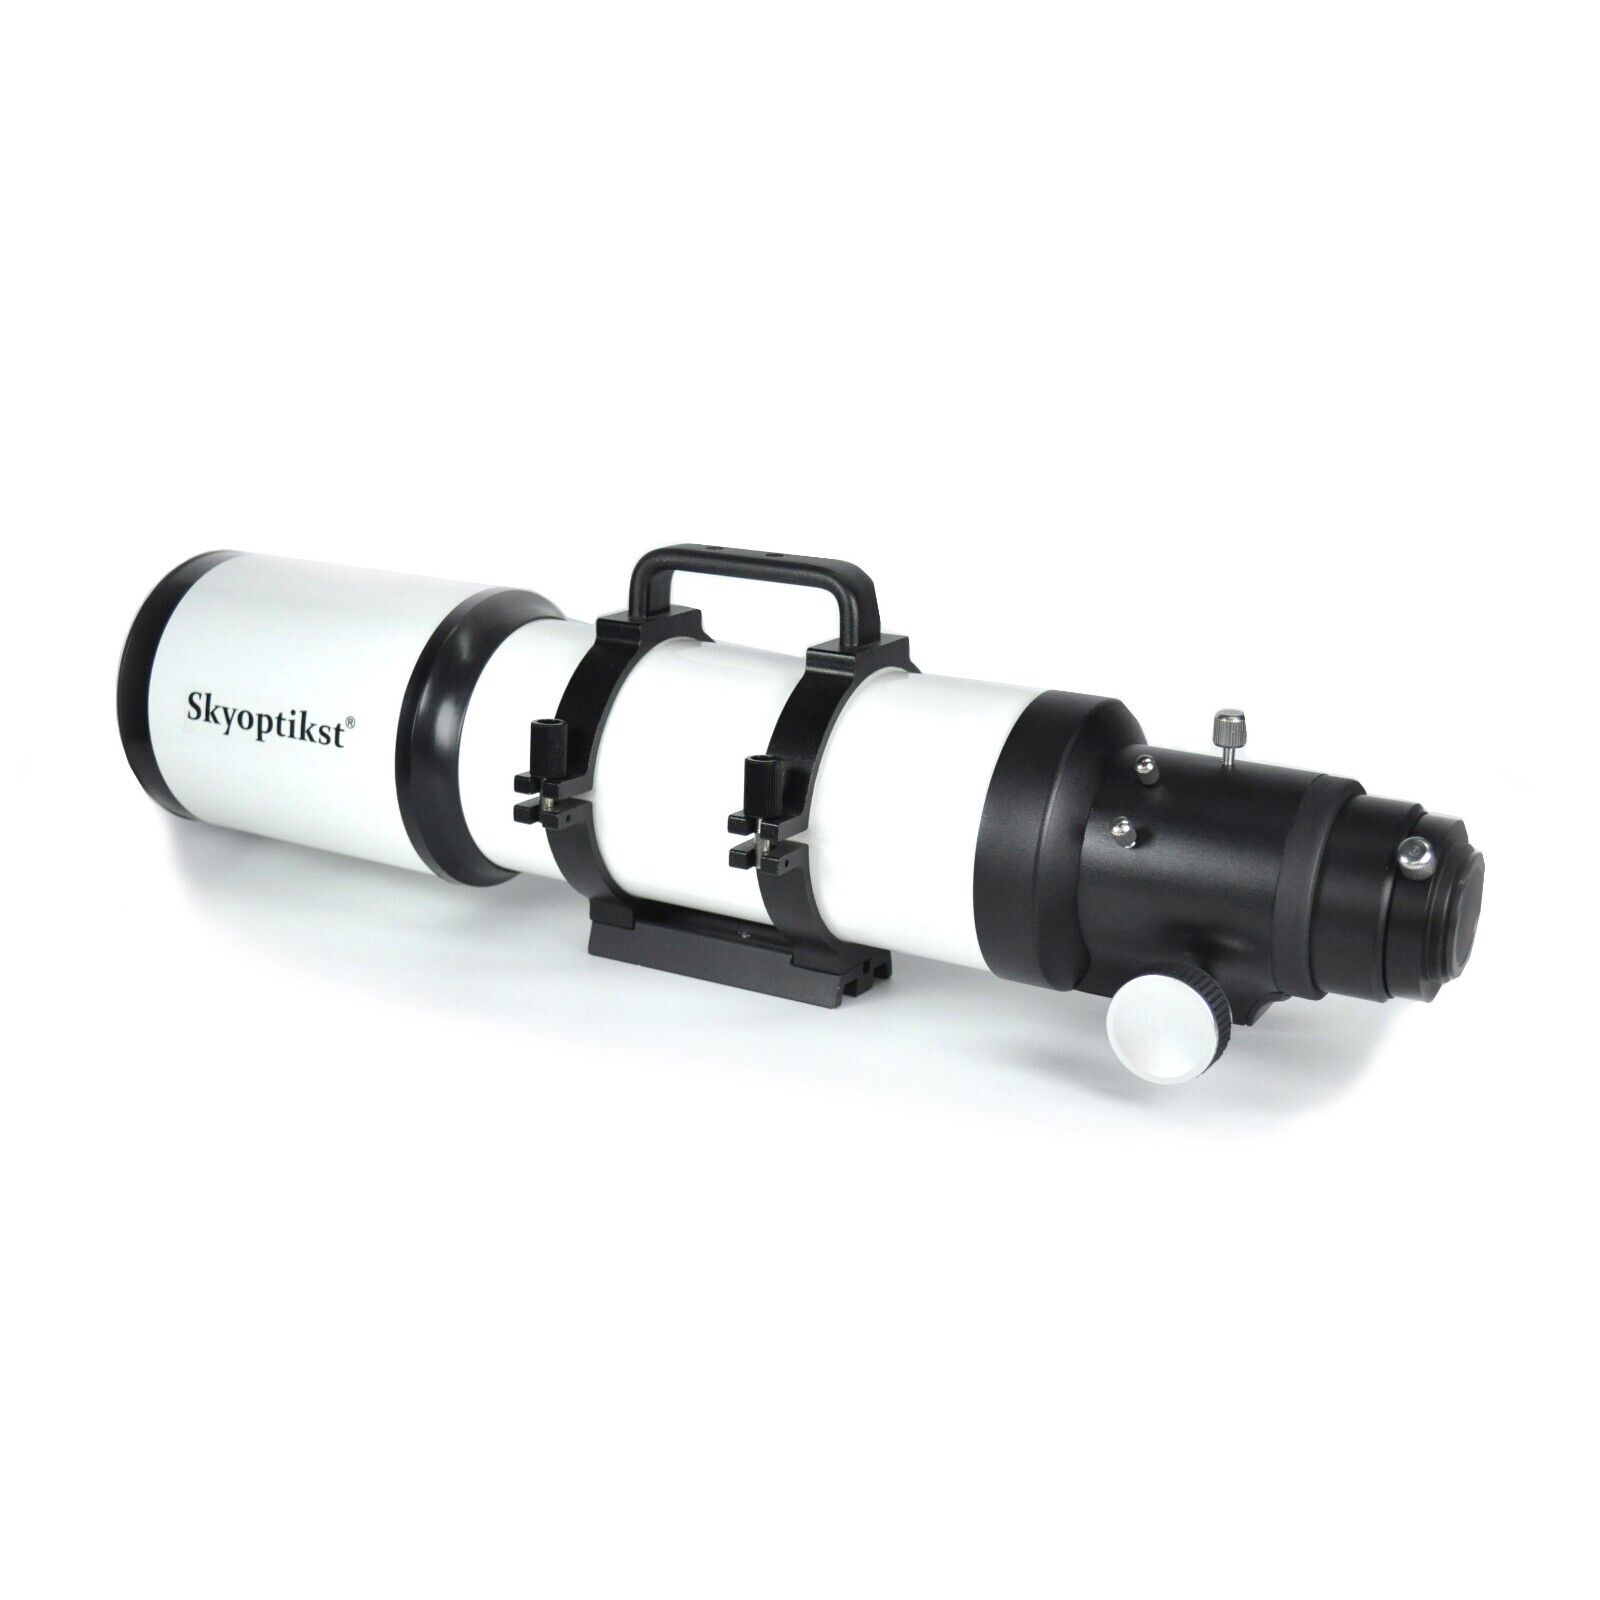 2-inch 90/500mm multifunctional astronomical telescope guide scope photography